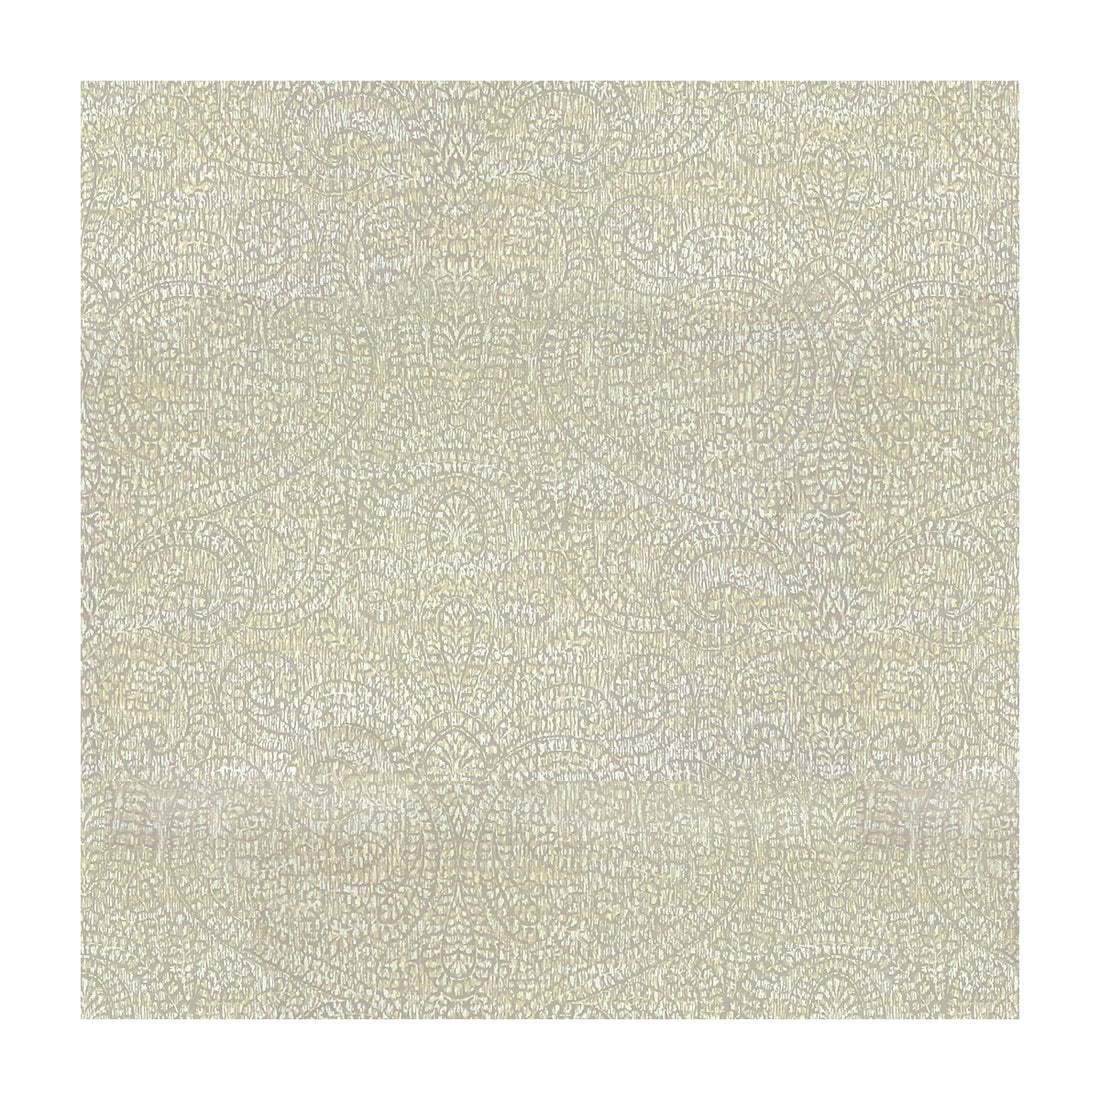 Chic Allure fabric in putty color - pattern 33984.1116.0 - by Kravet Couture in the Modern Luxe II collection